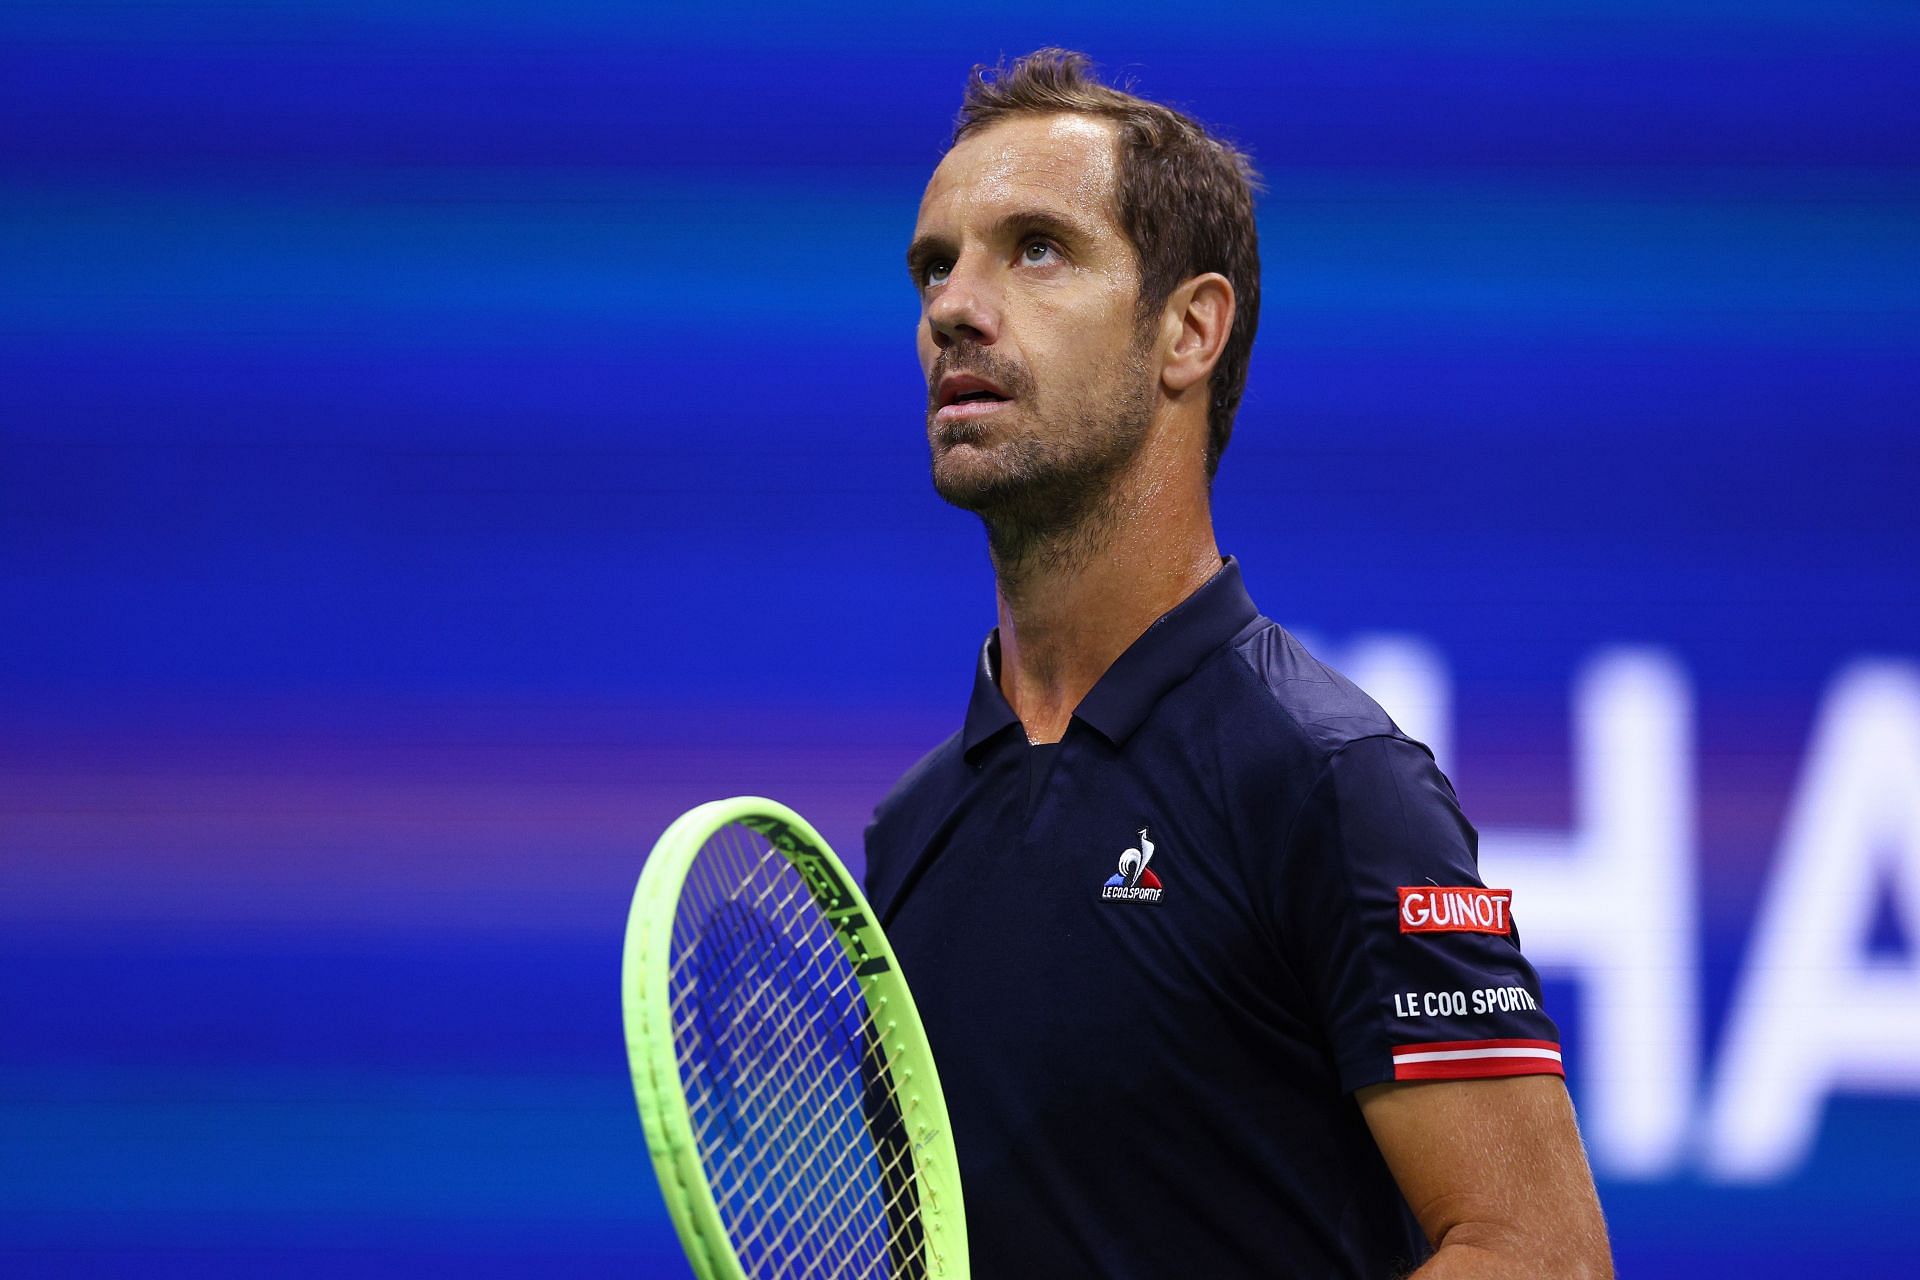 Richard Gasquet at the 2022 US Open.